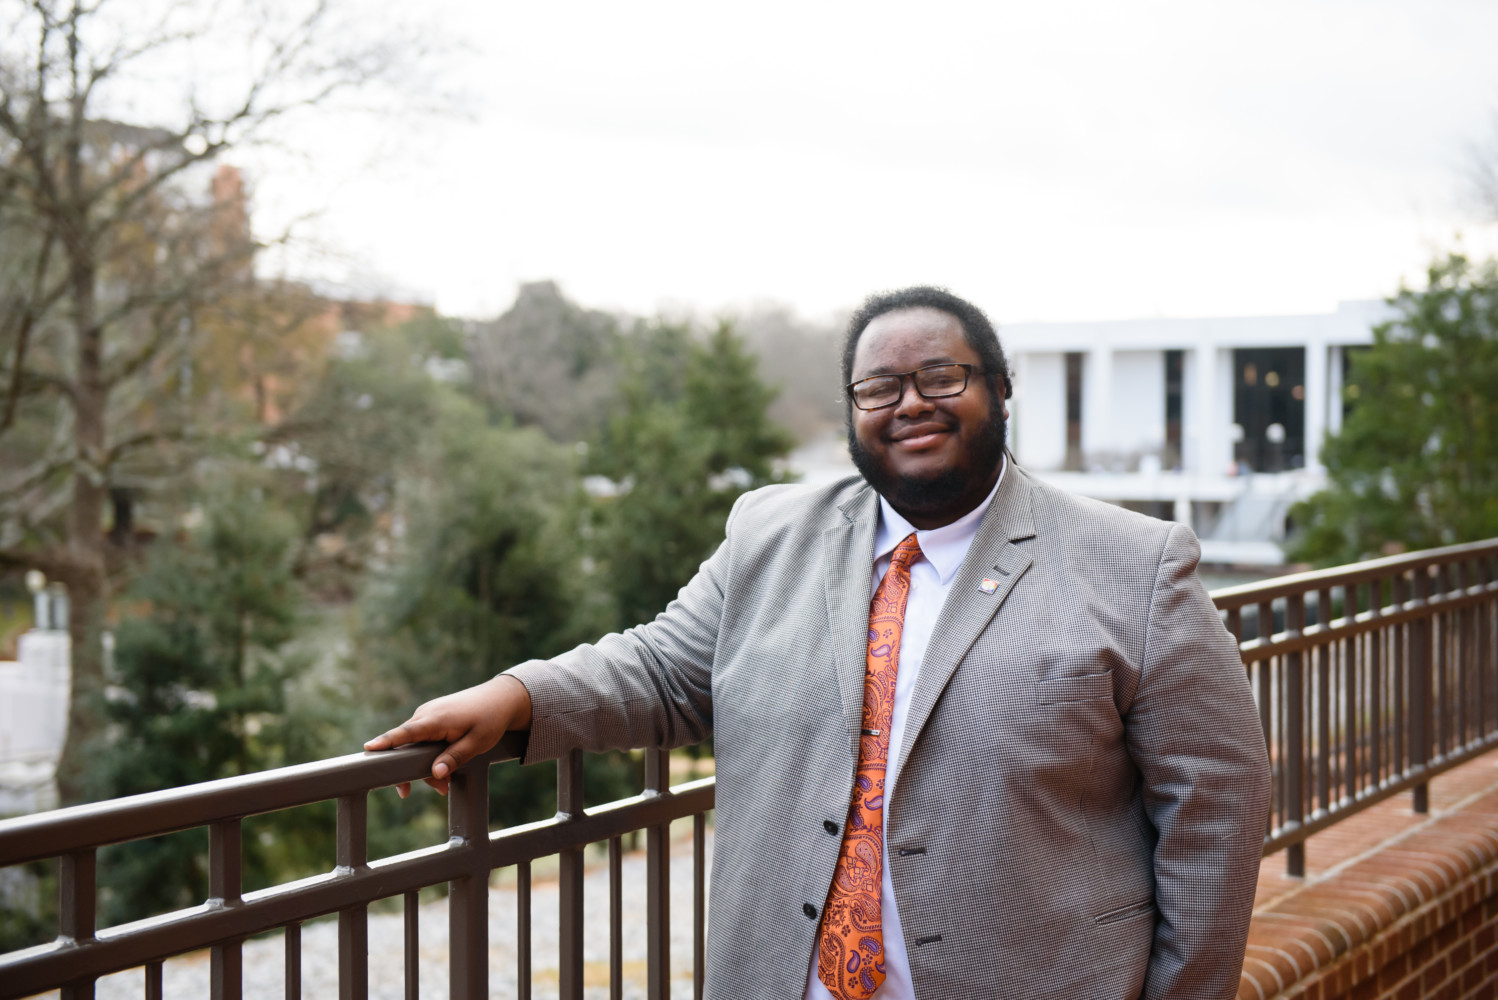 Jerad Green stands with his hand leaning on a metal rail. The Clemson Library is seen in the background.